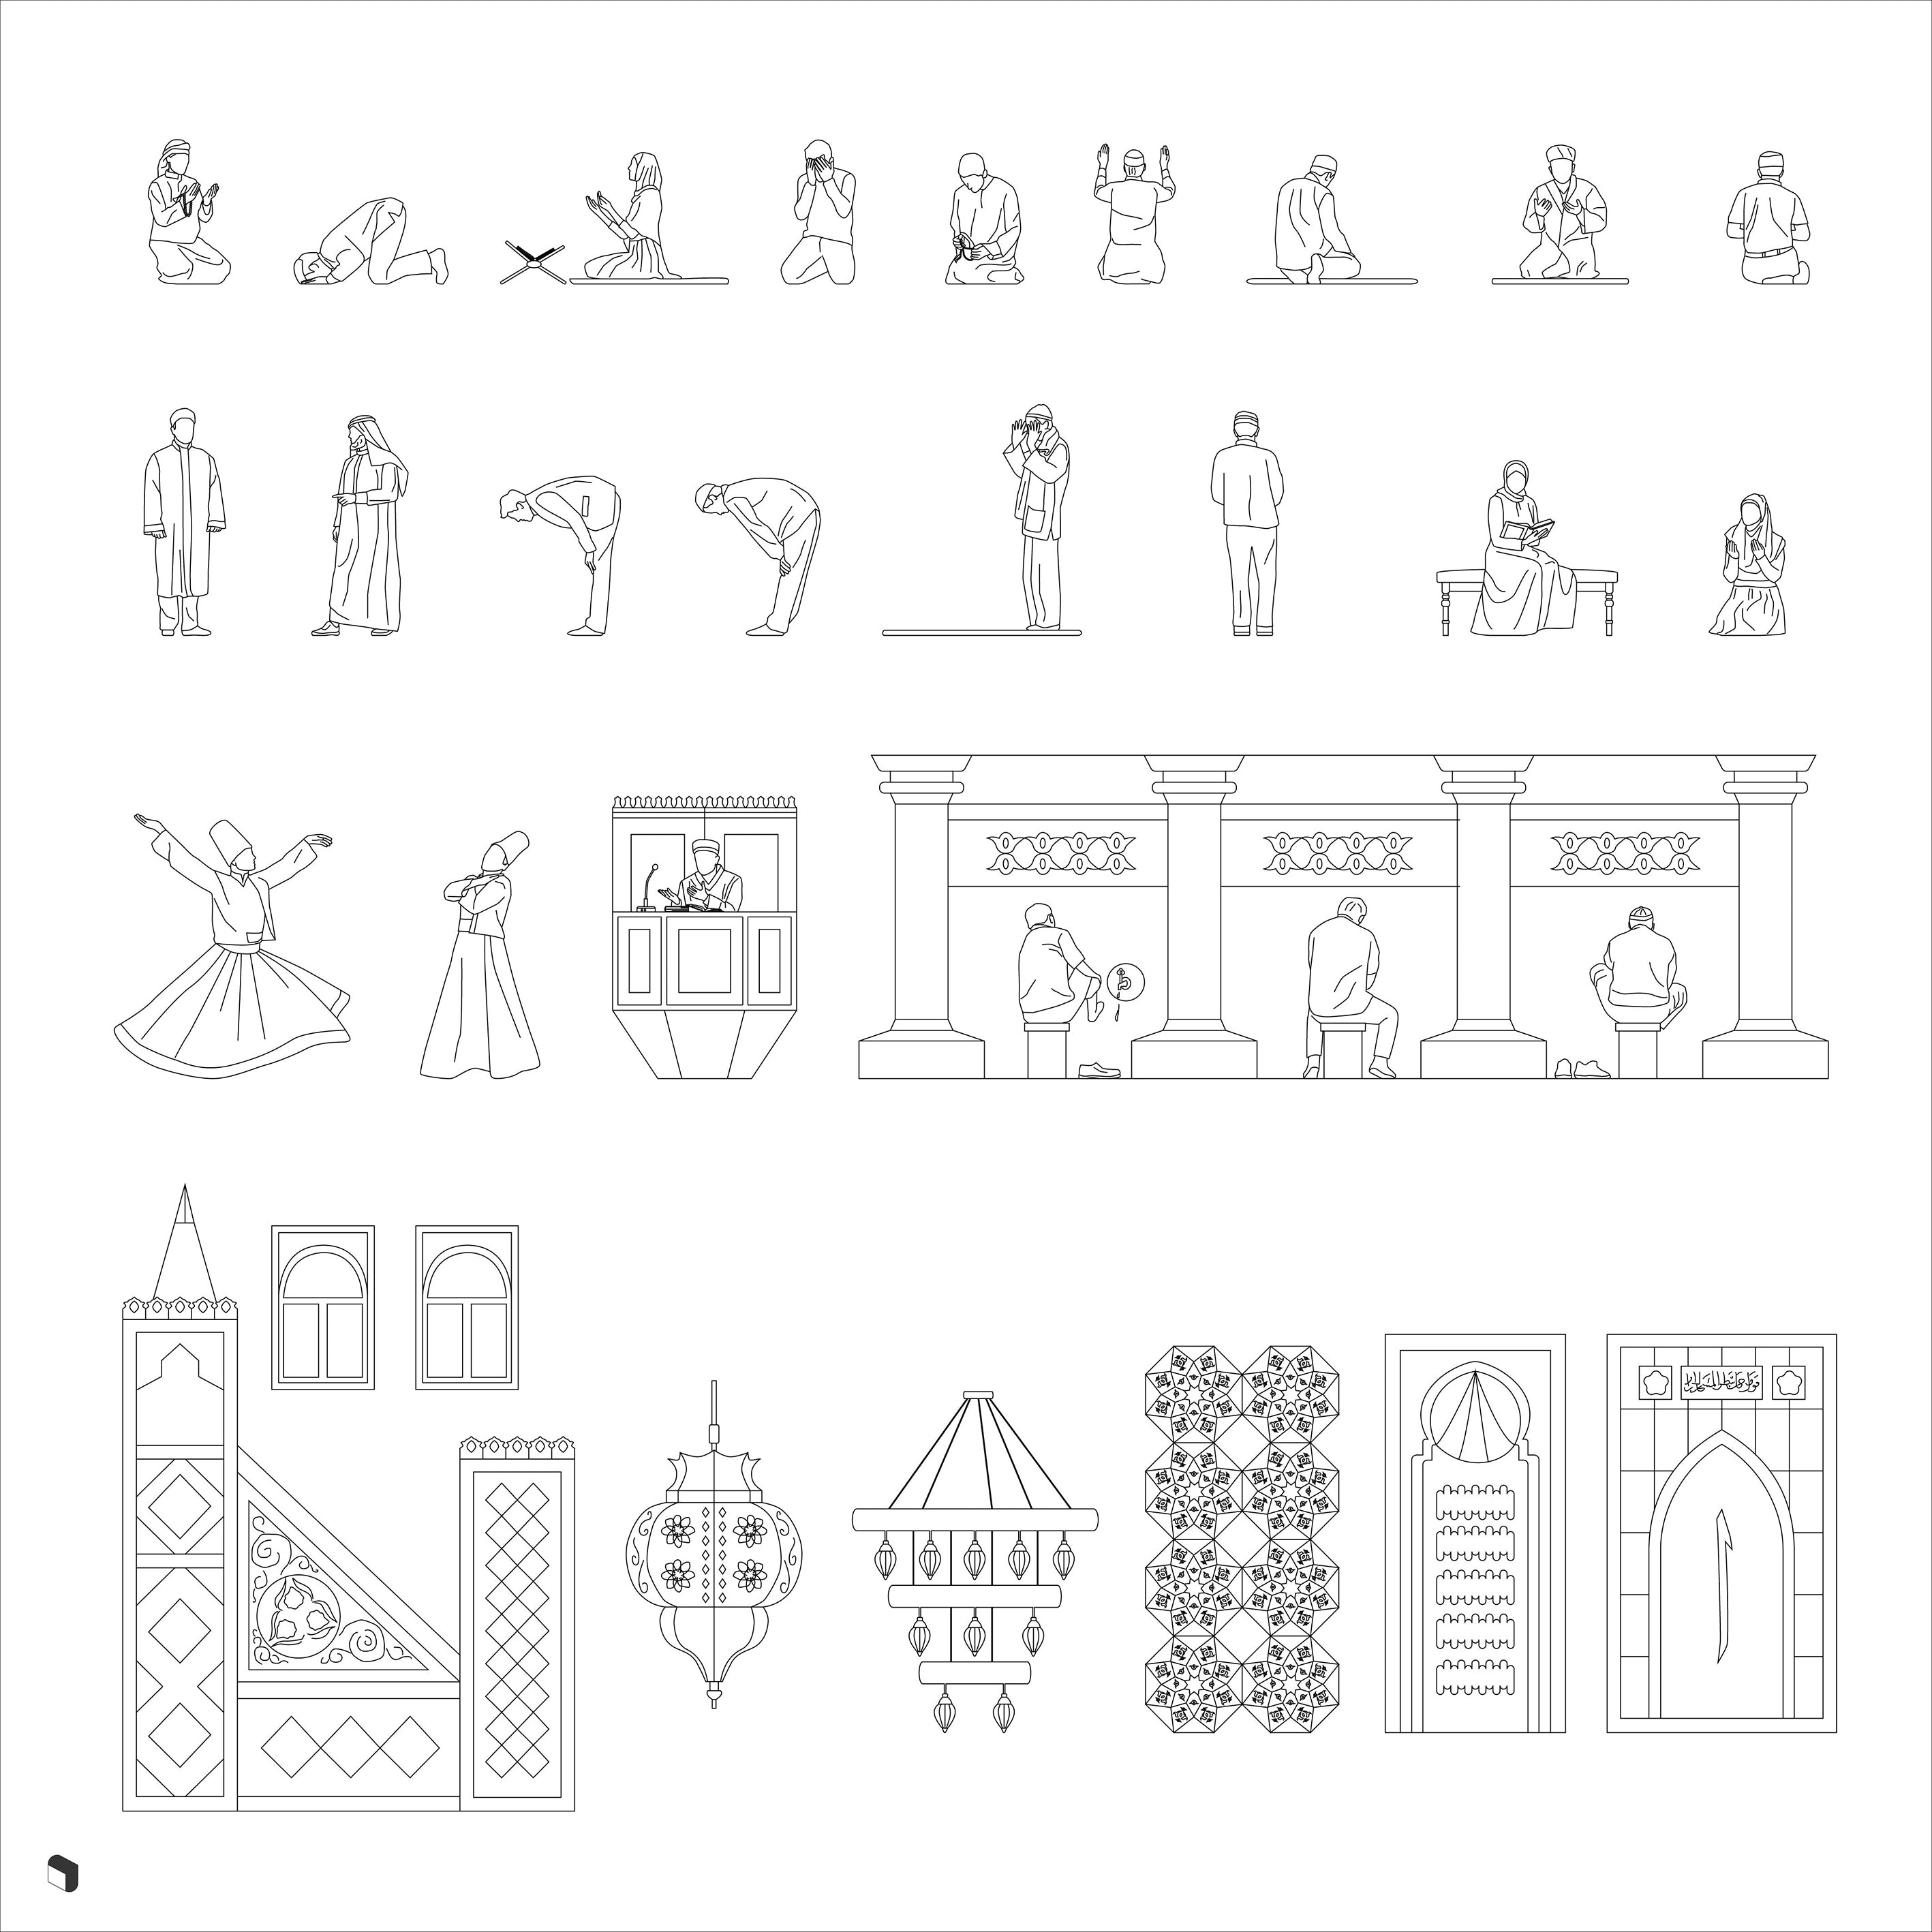 Cad Religion People 2 DWG | Toffu Co